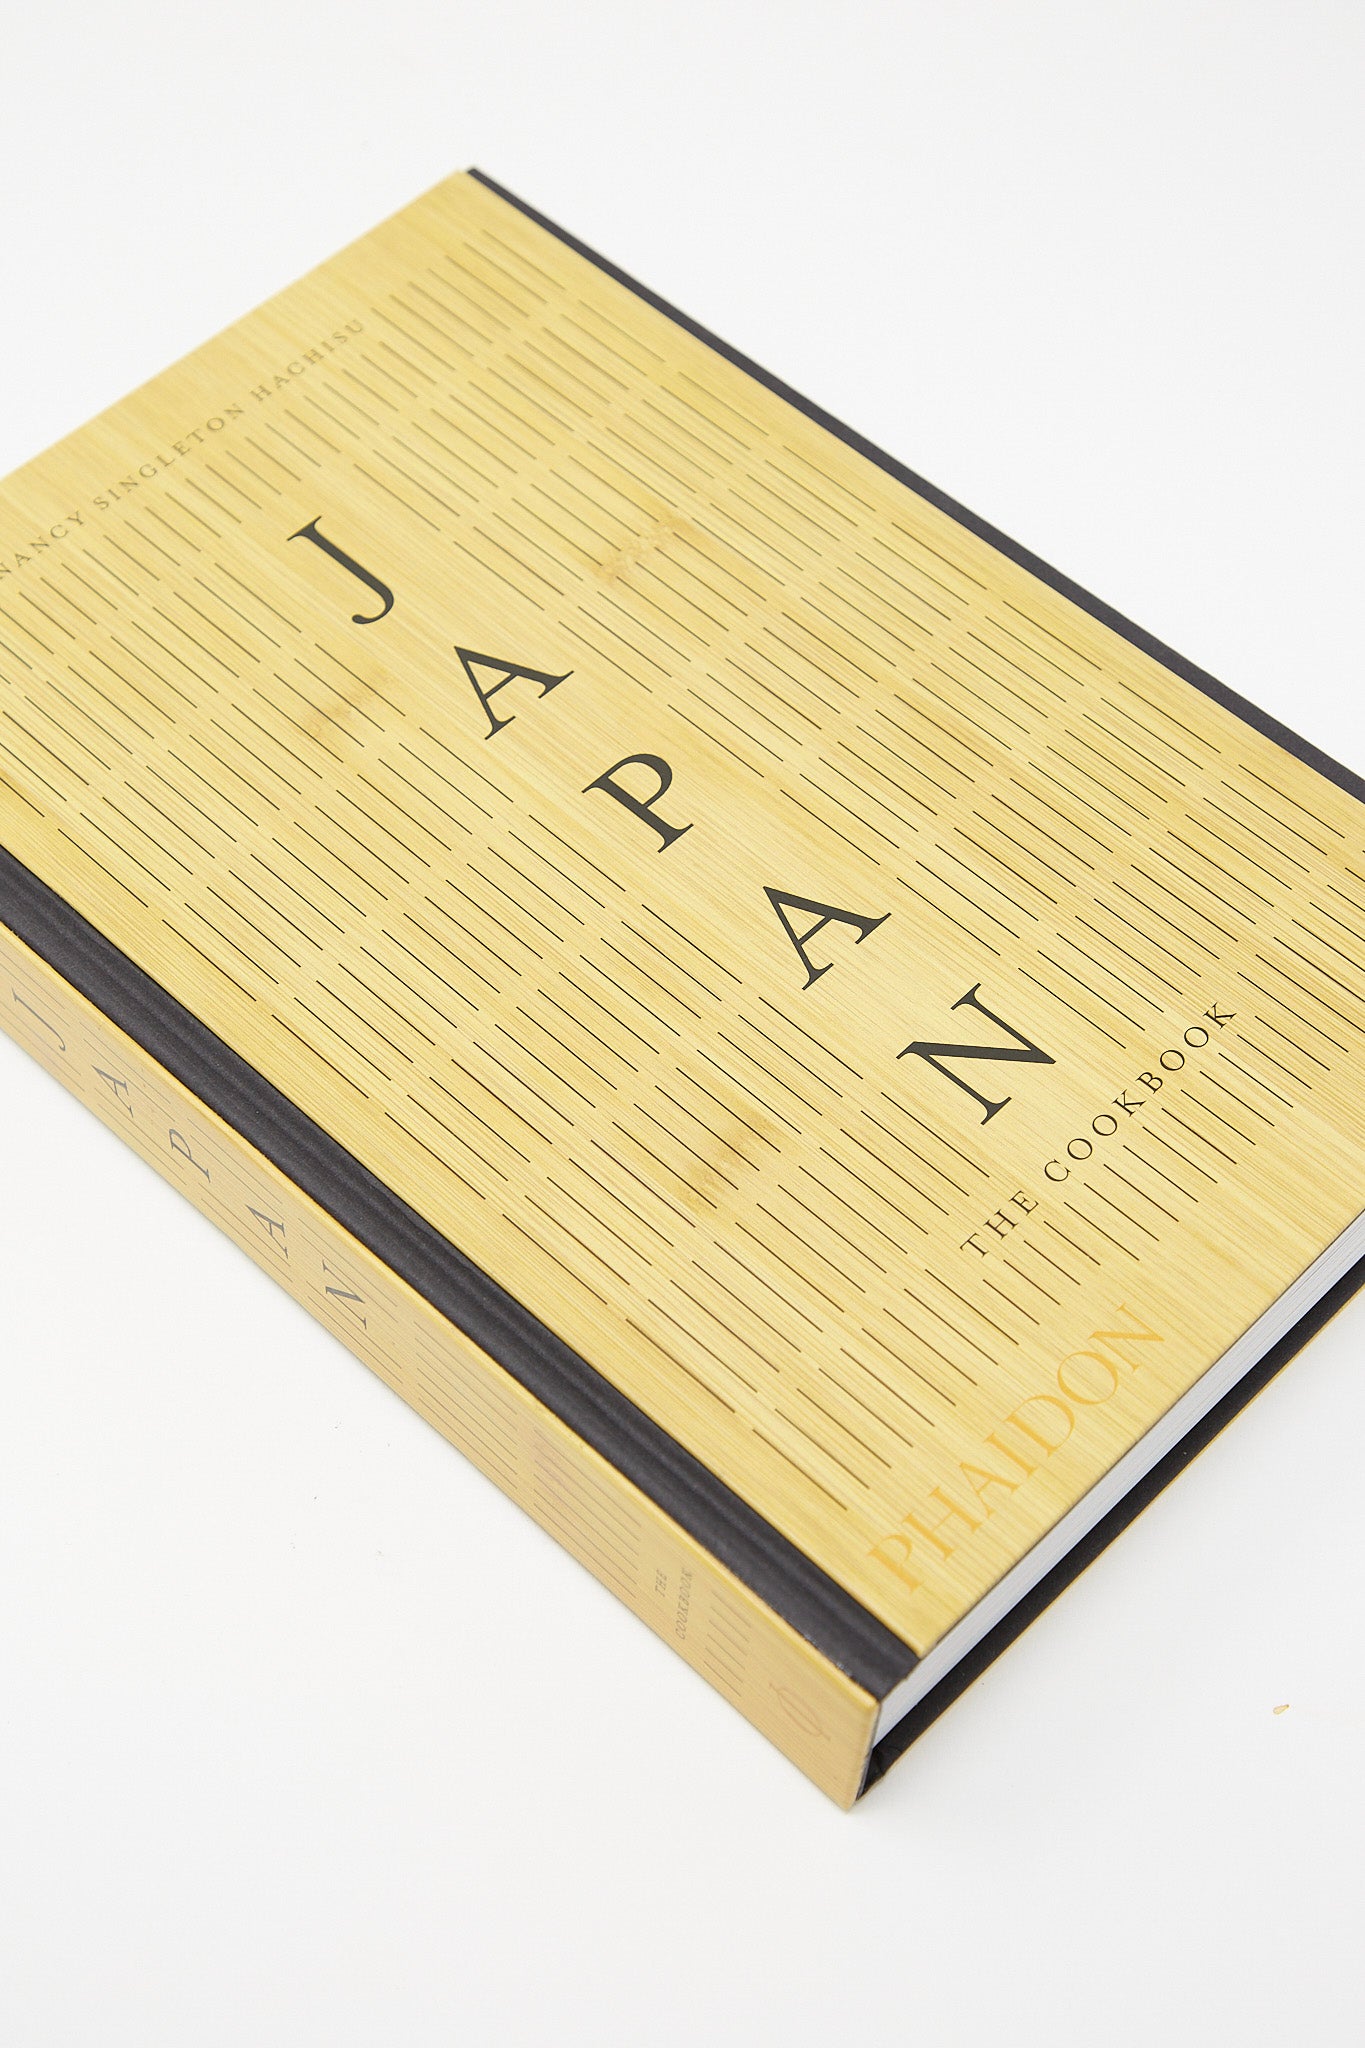 Phaidon - Nancy Singleton Hachisu - Japan Cookbook: A collection of authentic Japanese recipes by an expert author.